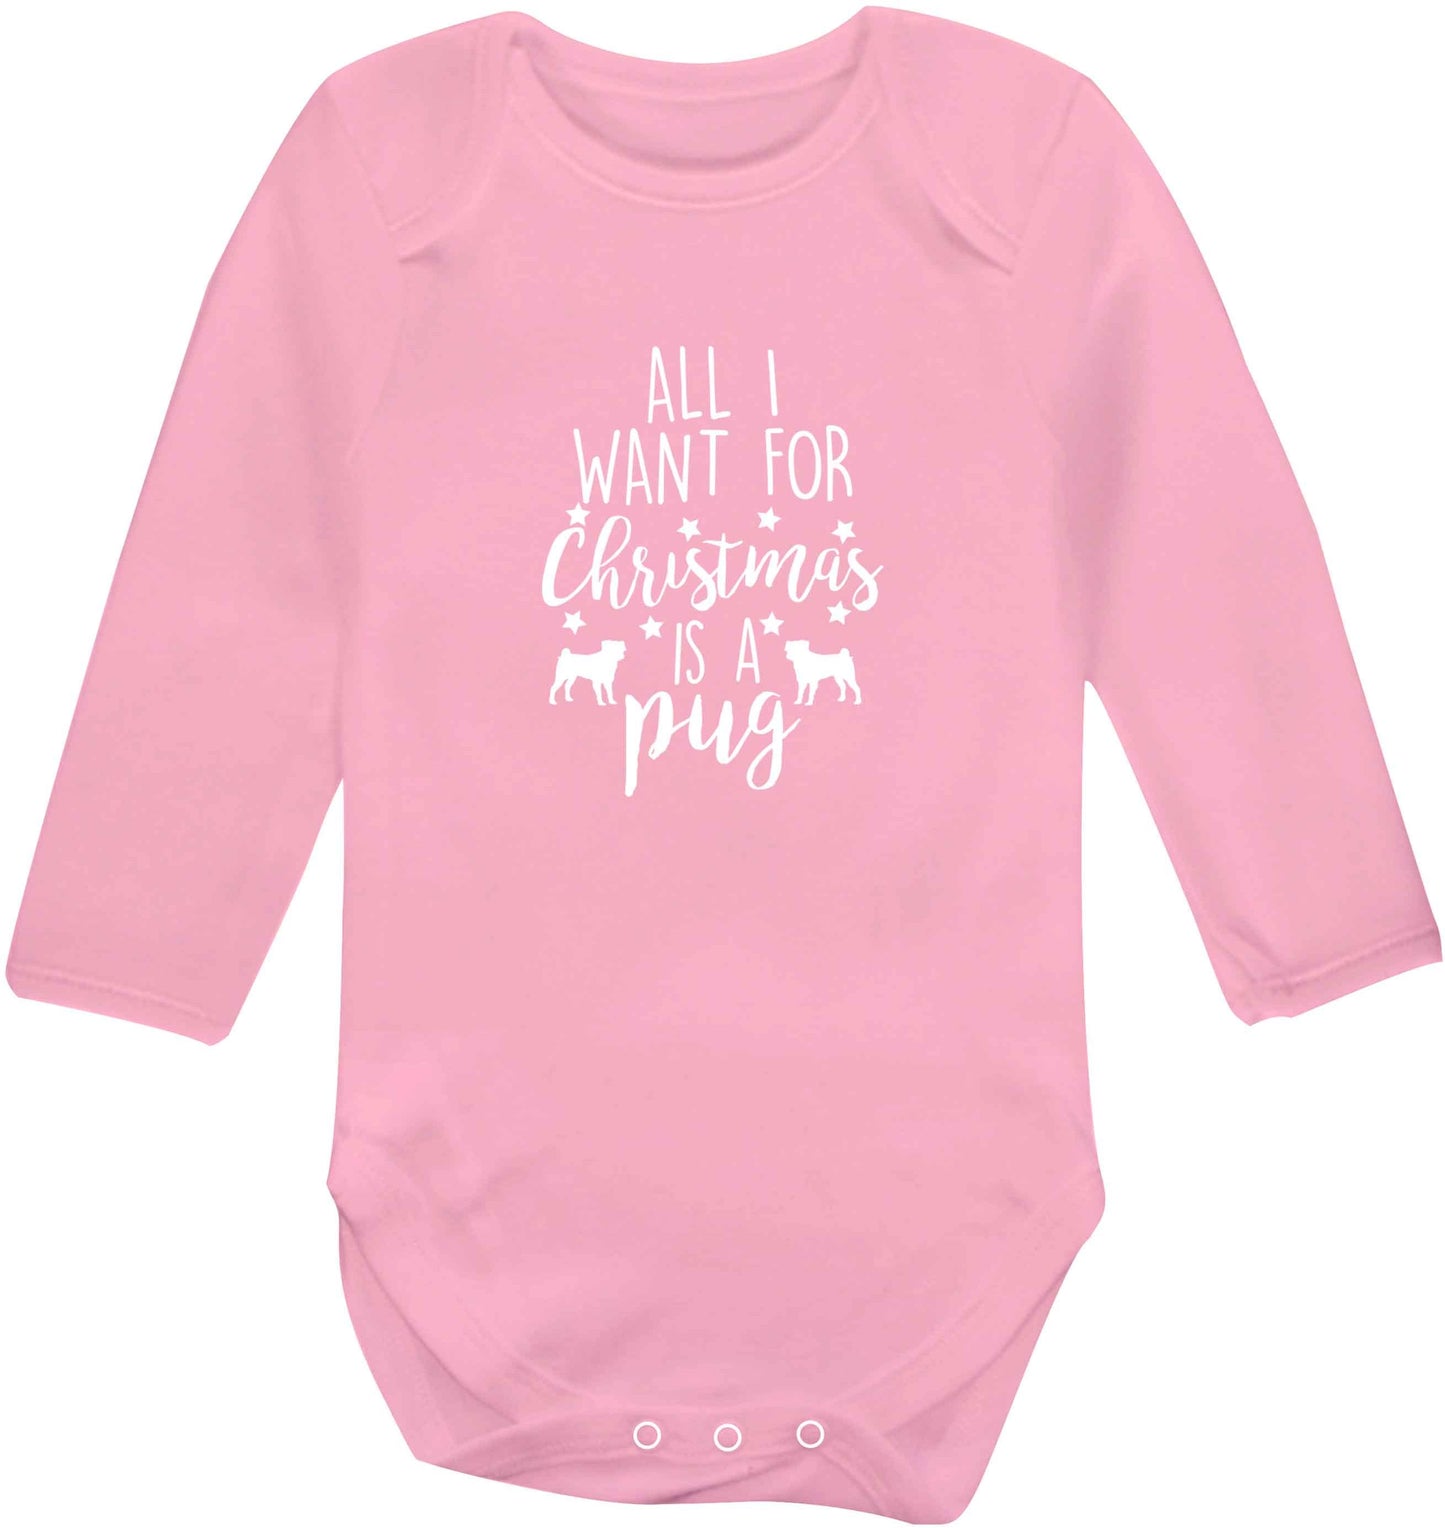 All I want for Christmas is a pug baby vest long sleeved pale pink 6-12 months